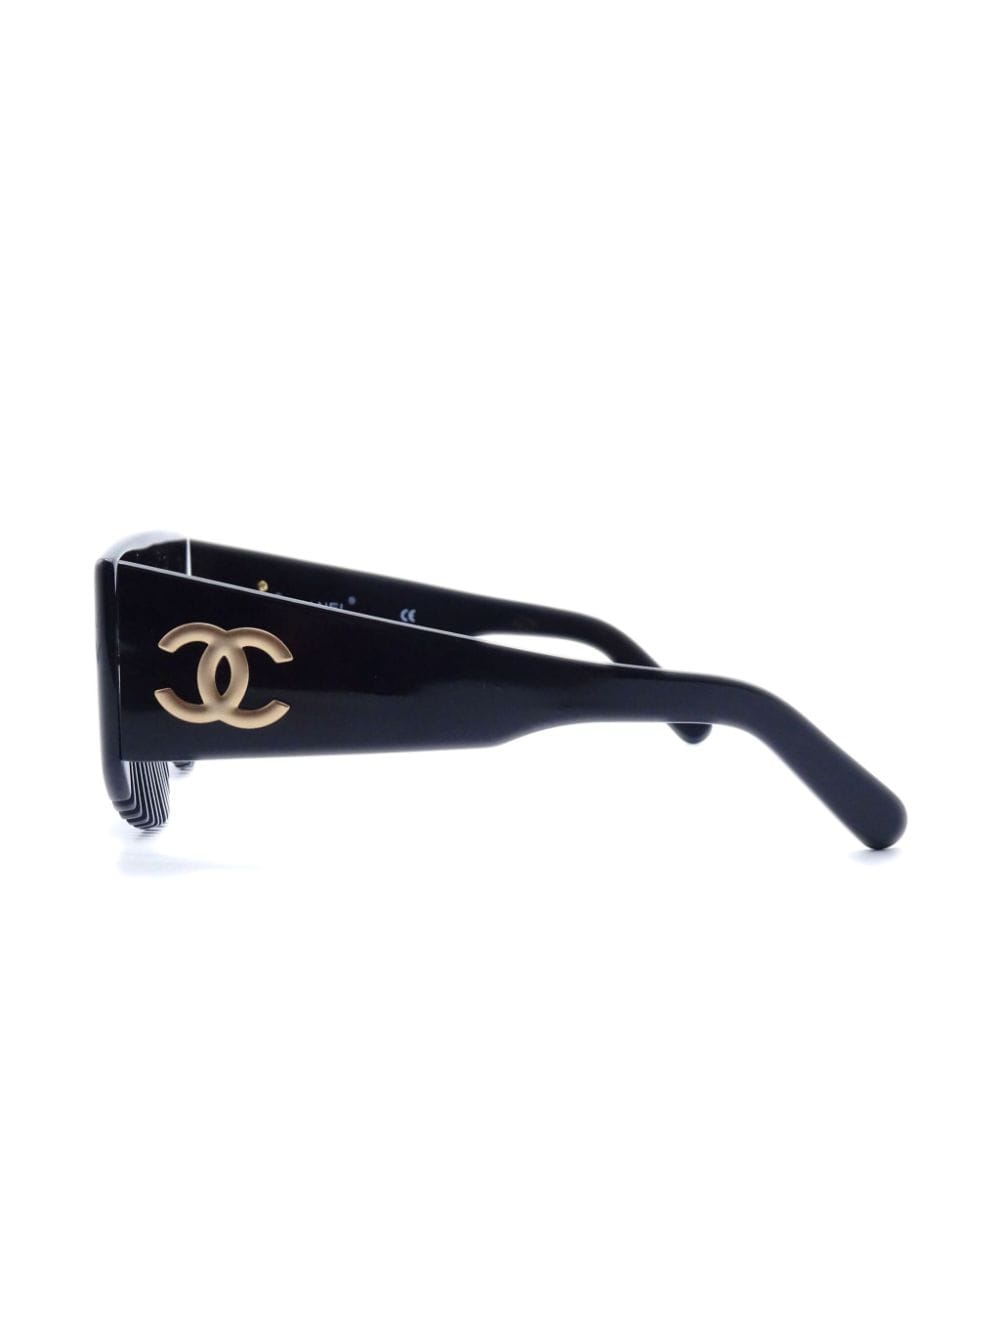 CHANEL Pre-Owned 1990-2000 Hair Comb oversize-frame Sunglasses